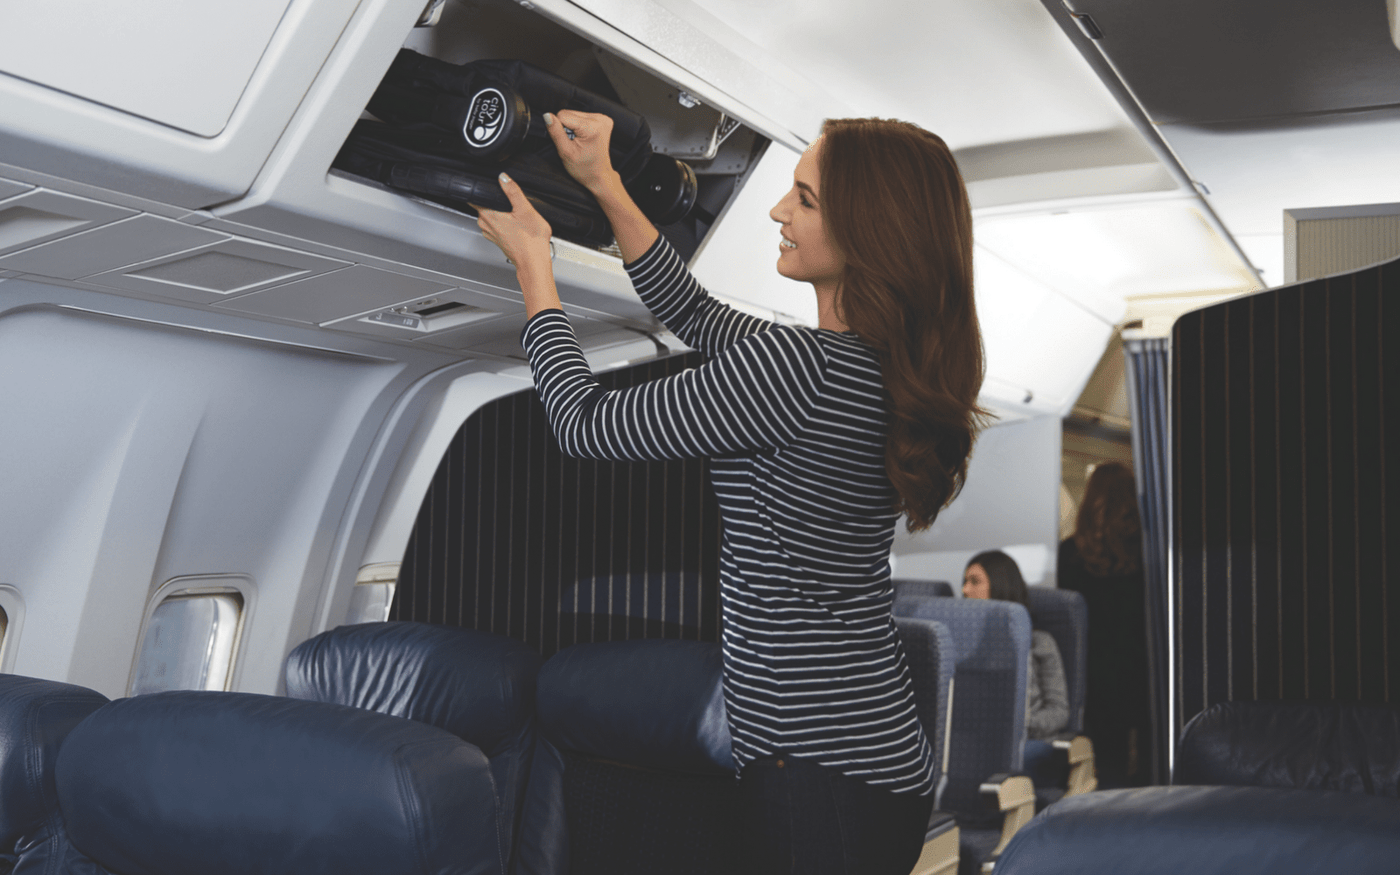 Strollers That Fit in an Overhead Compartment Bin